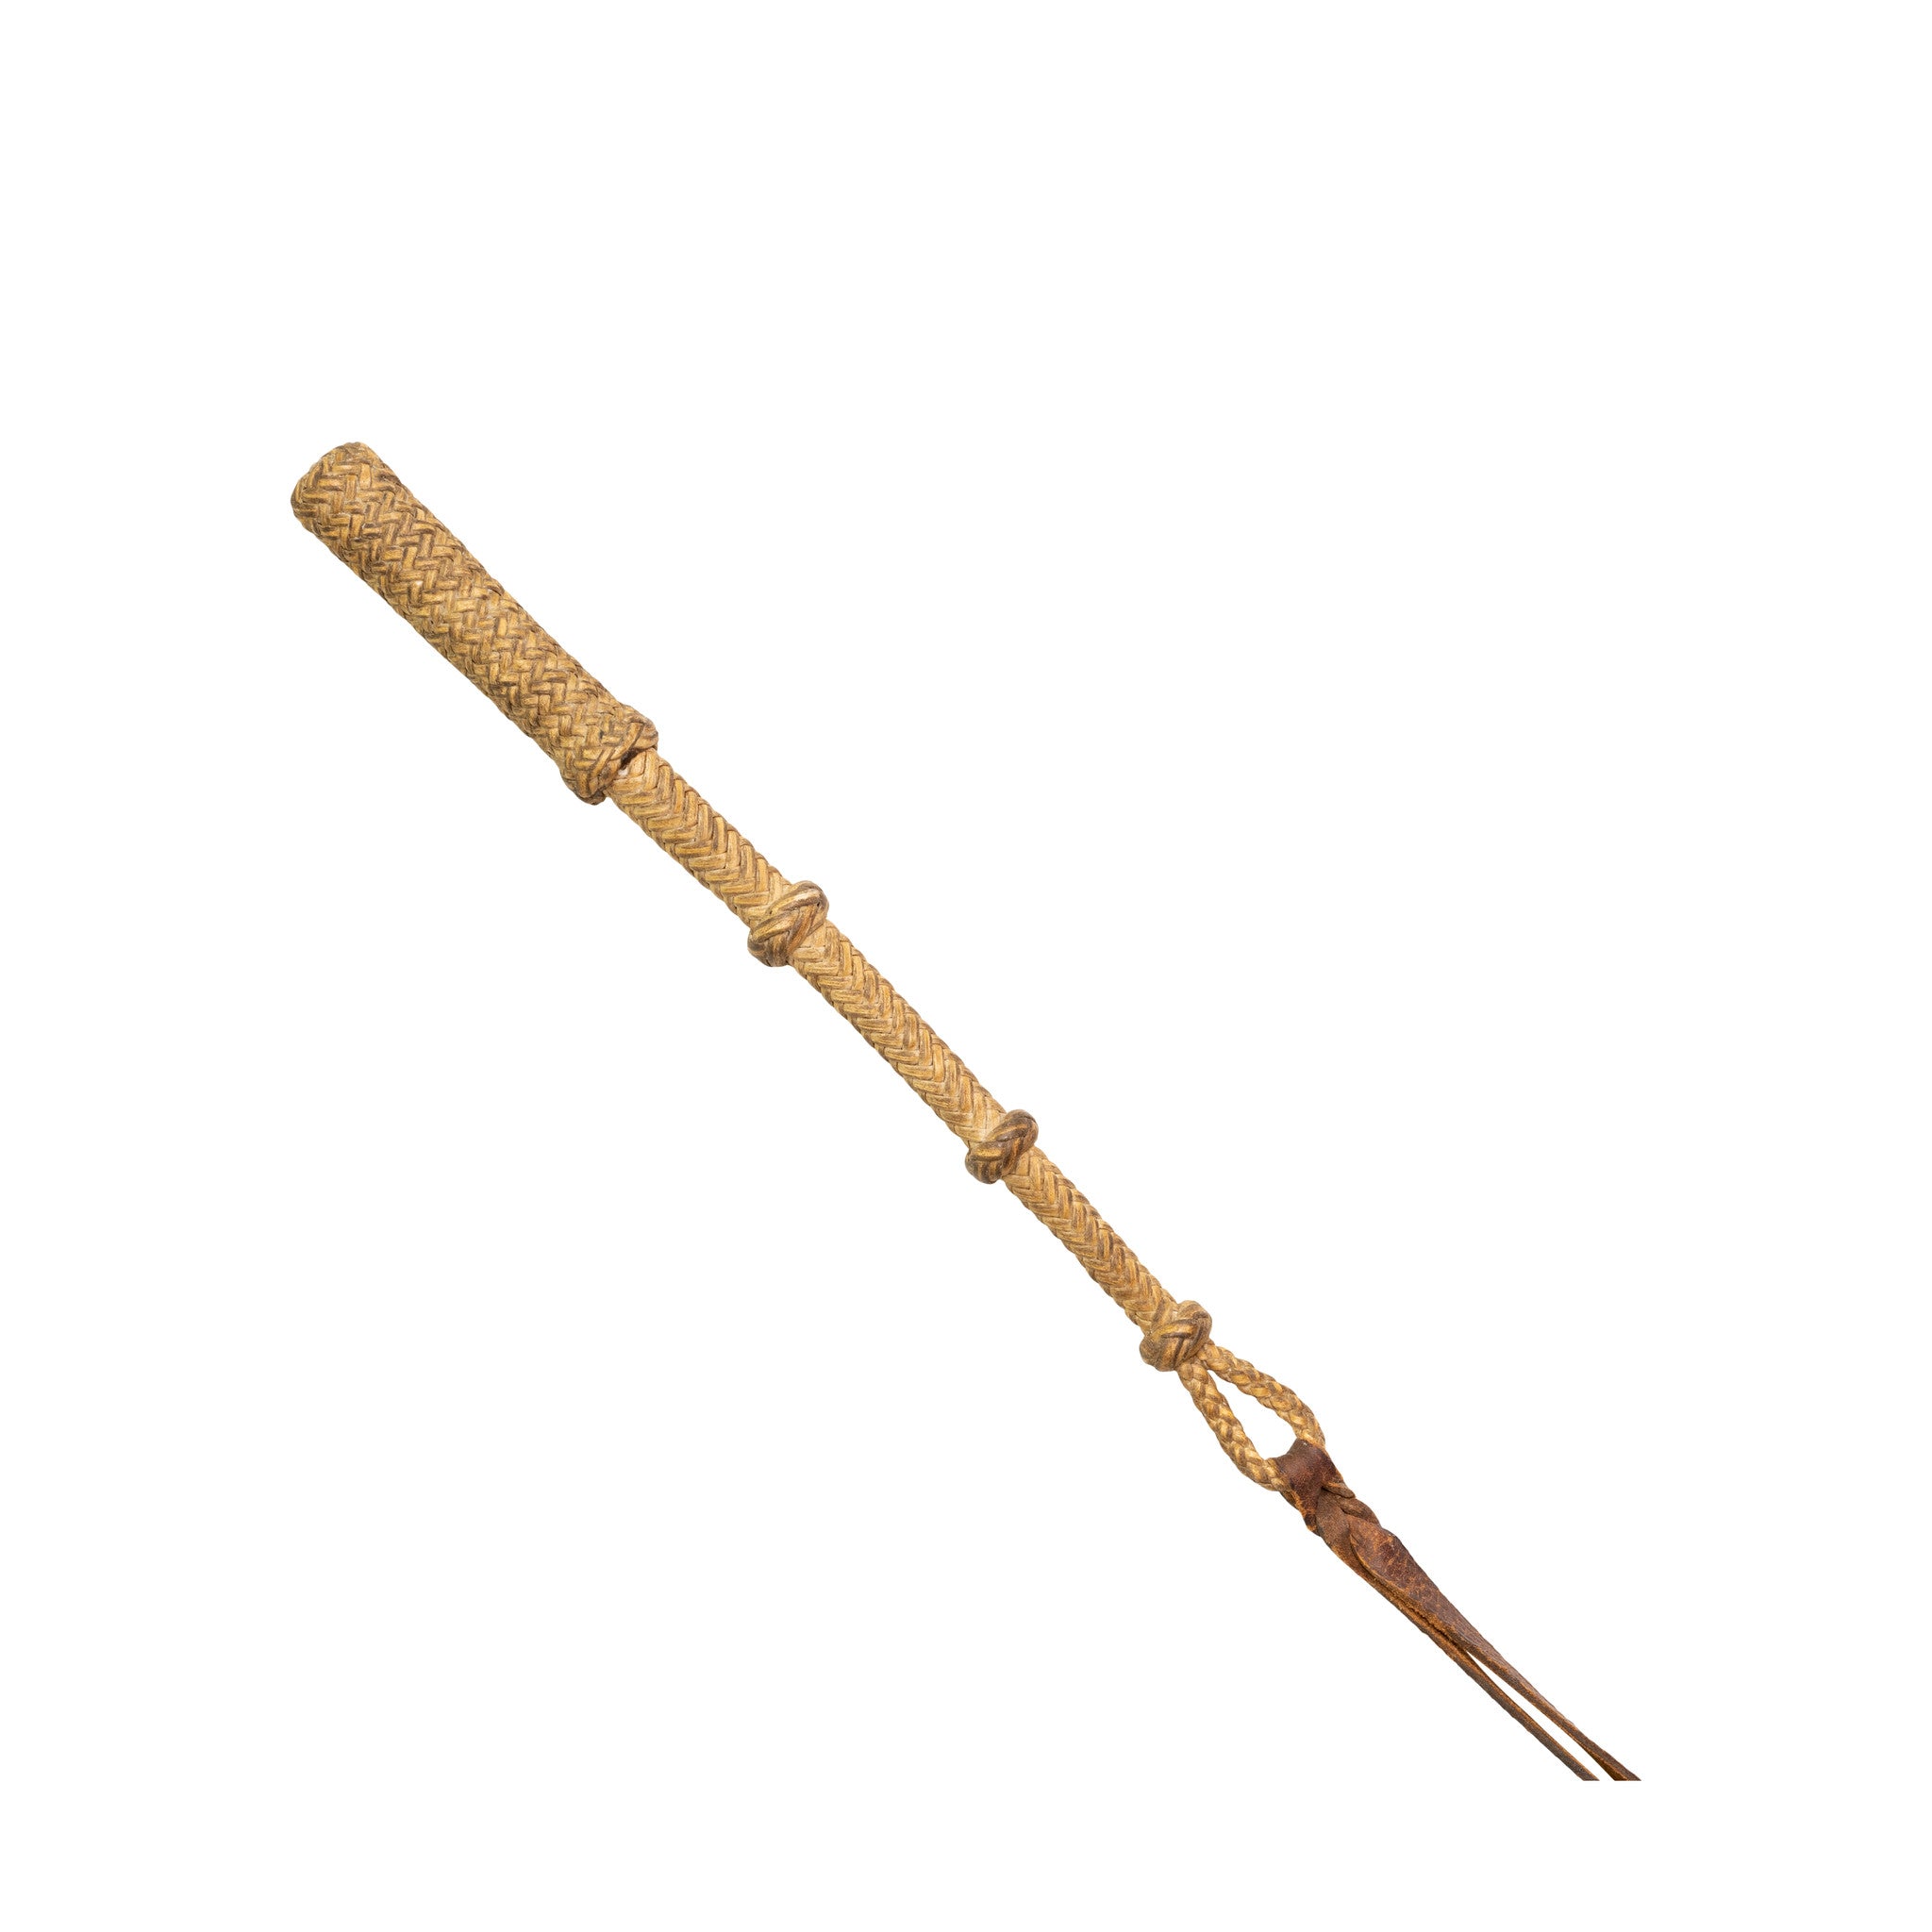 Rawhide Quirt with Knots